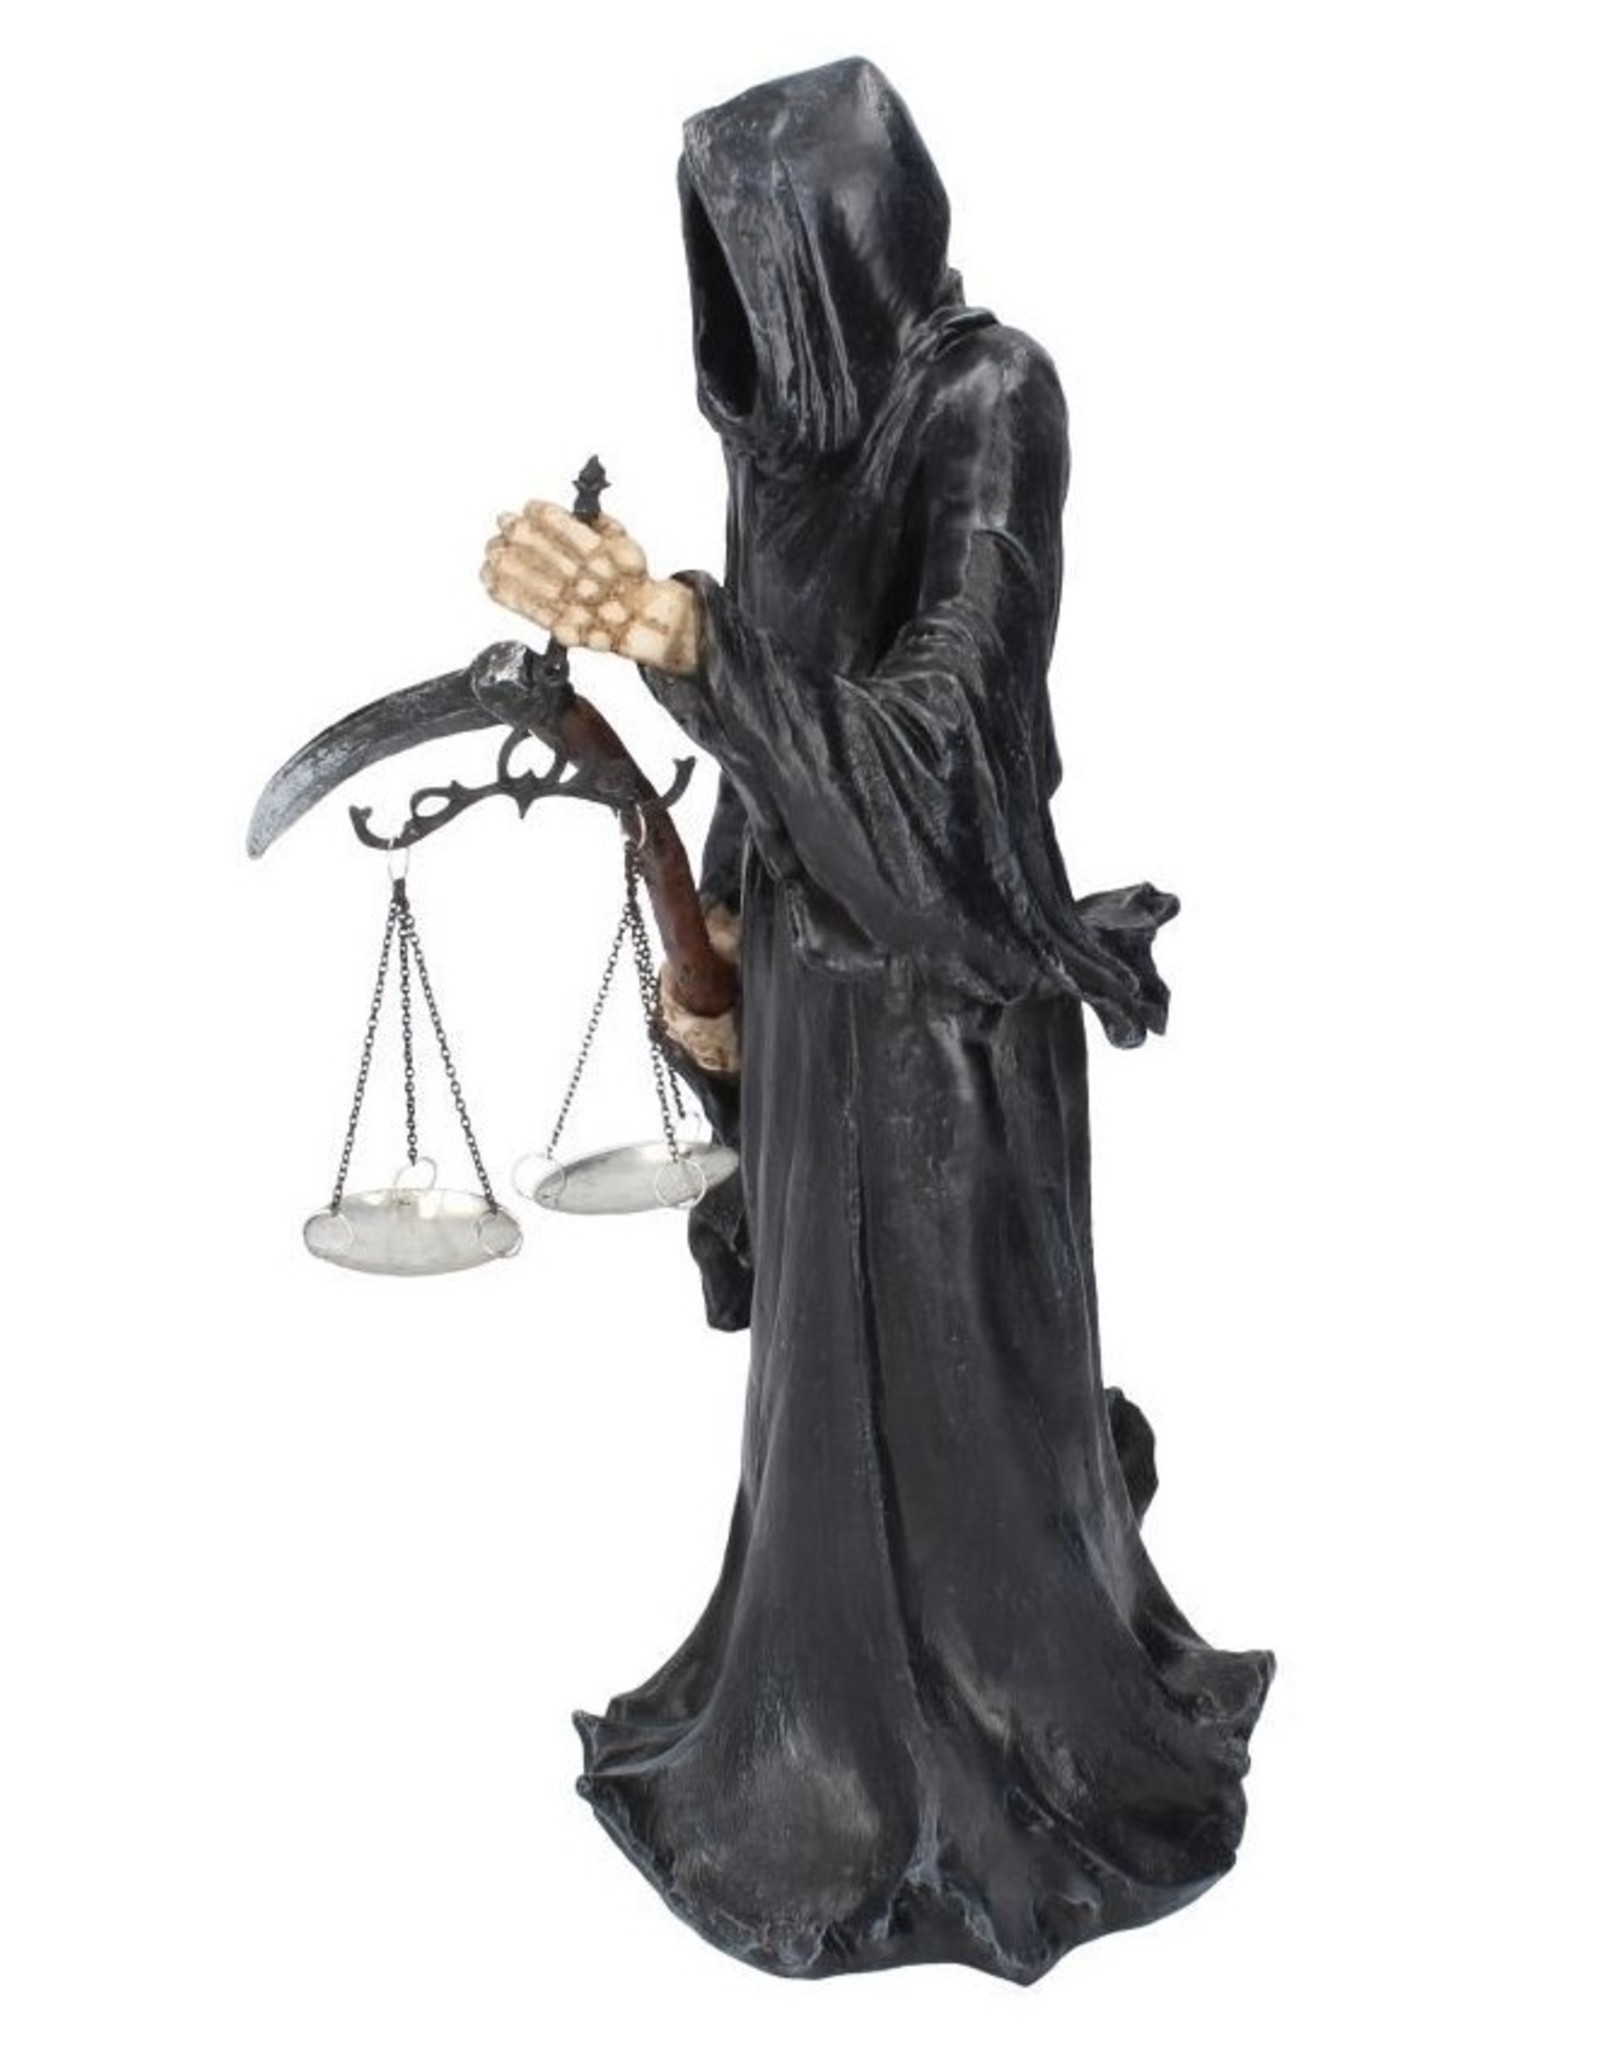 Nemesis Now Final Check In Reaper Figurine